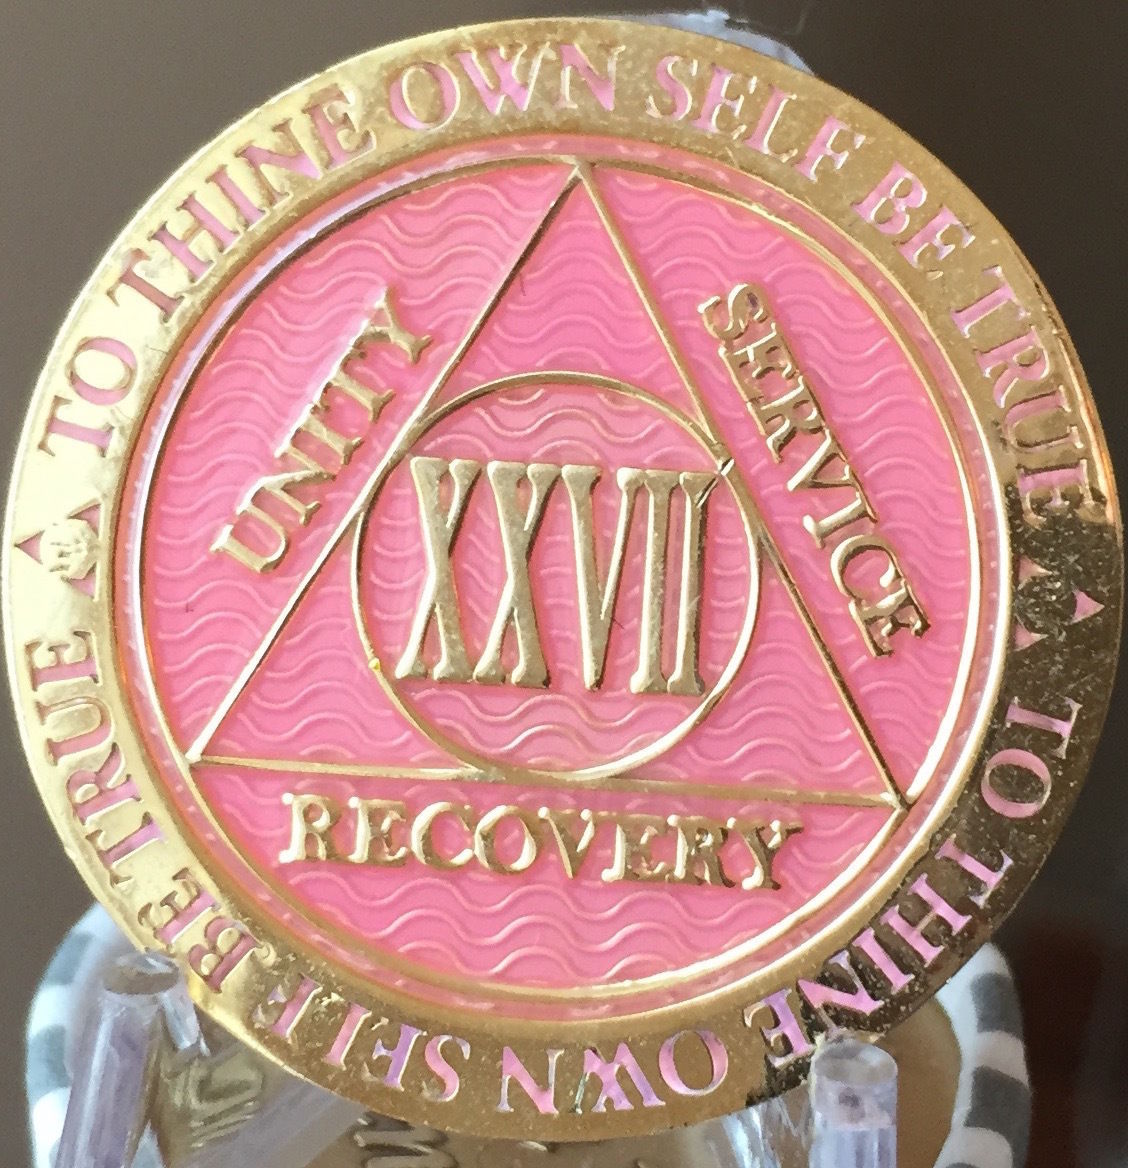 28 Year AA Medallion Pink Gold Plated Alcoholics Anonymous Sobriety Chip Coin 